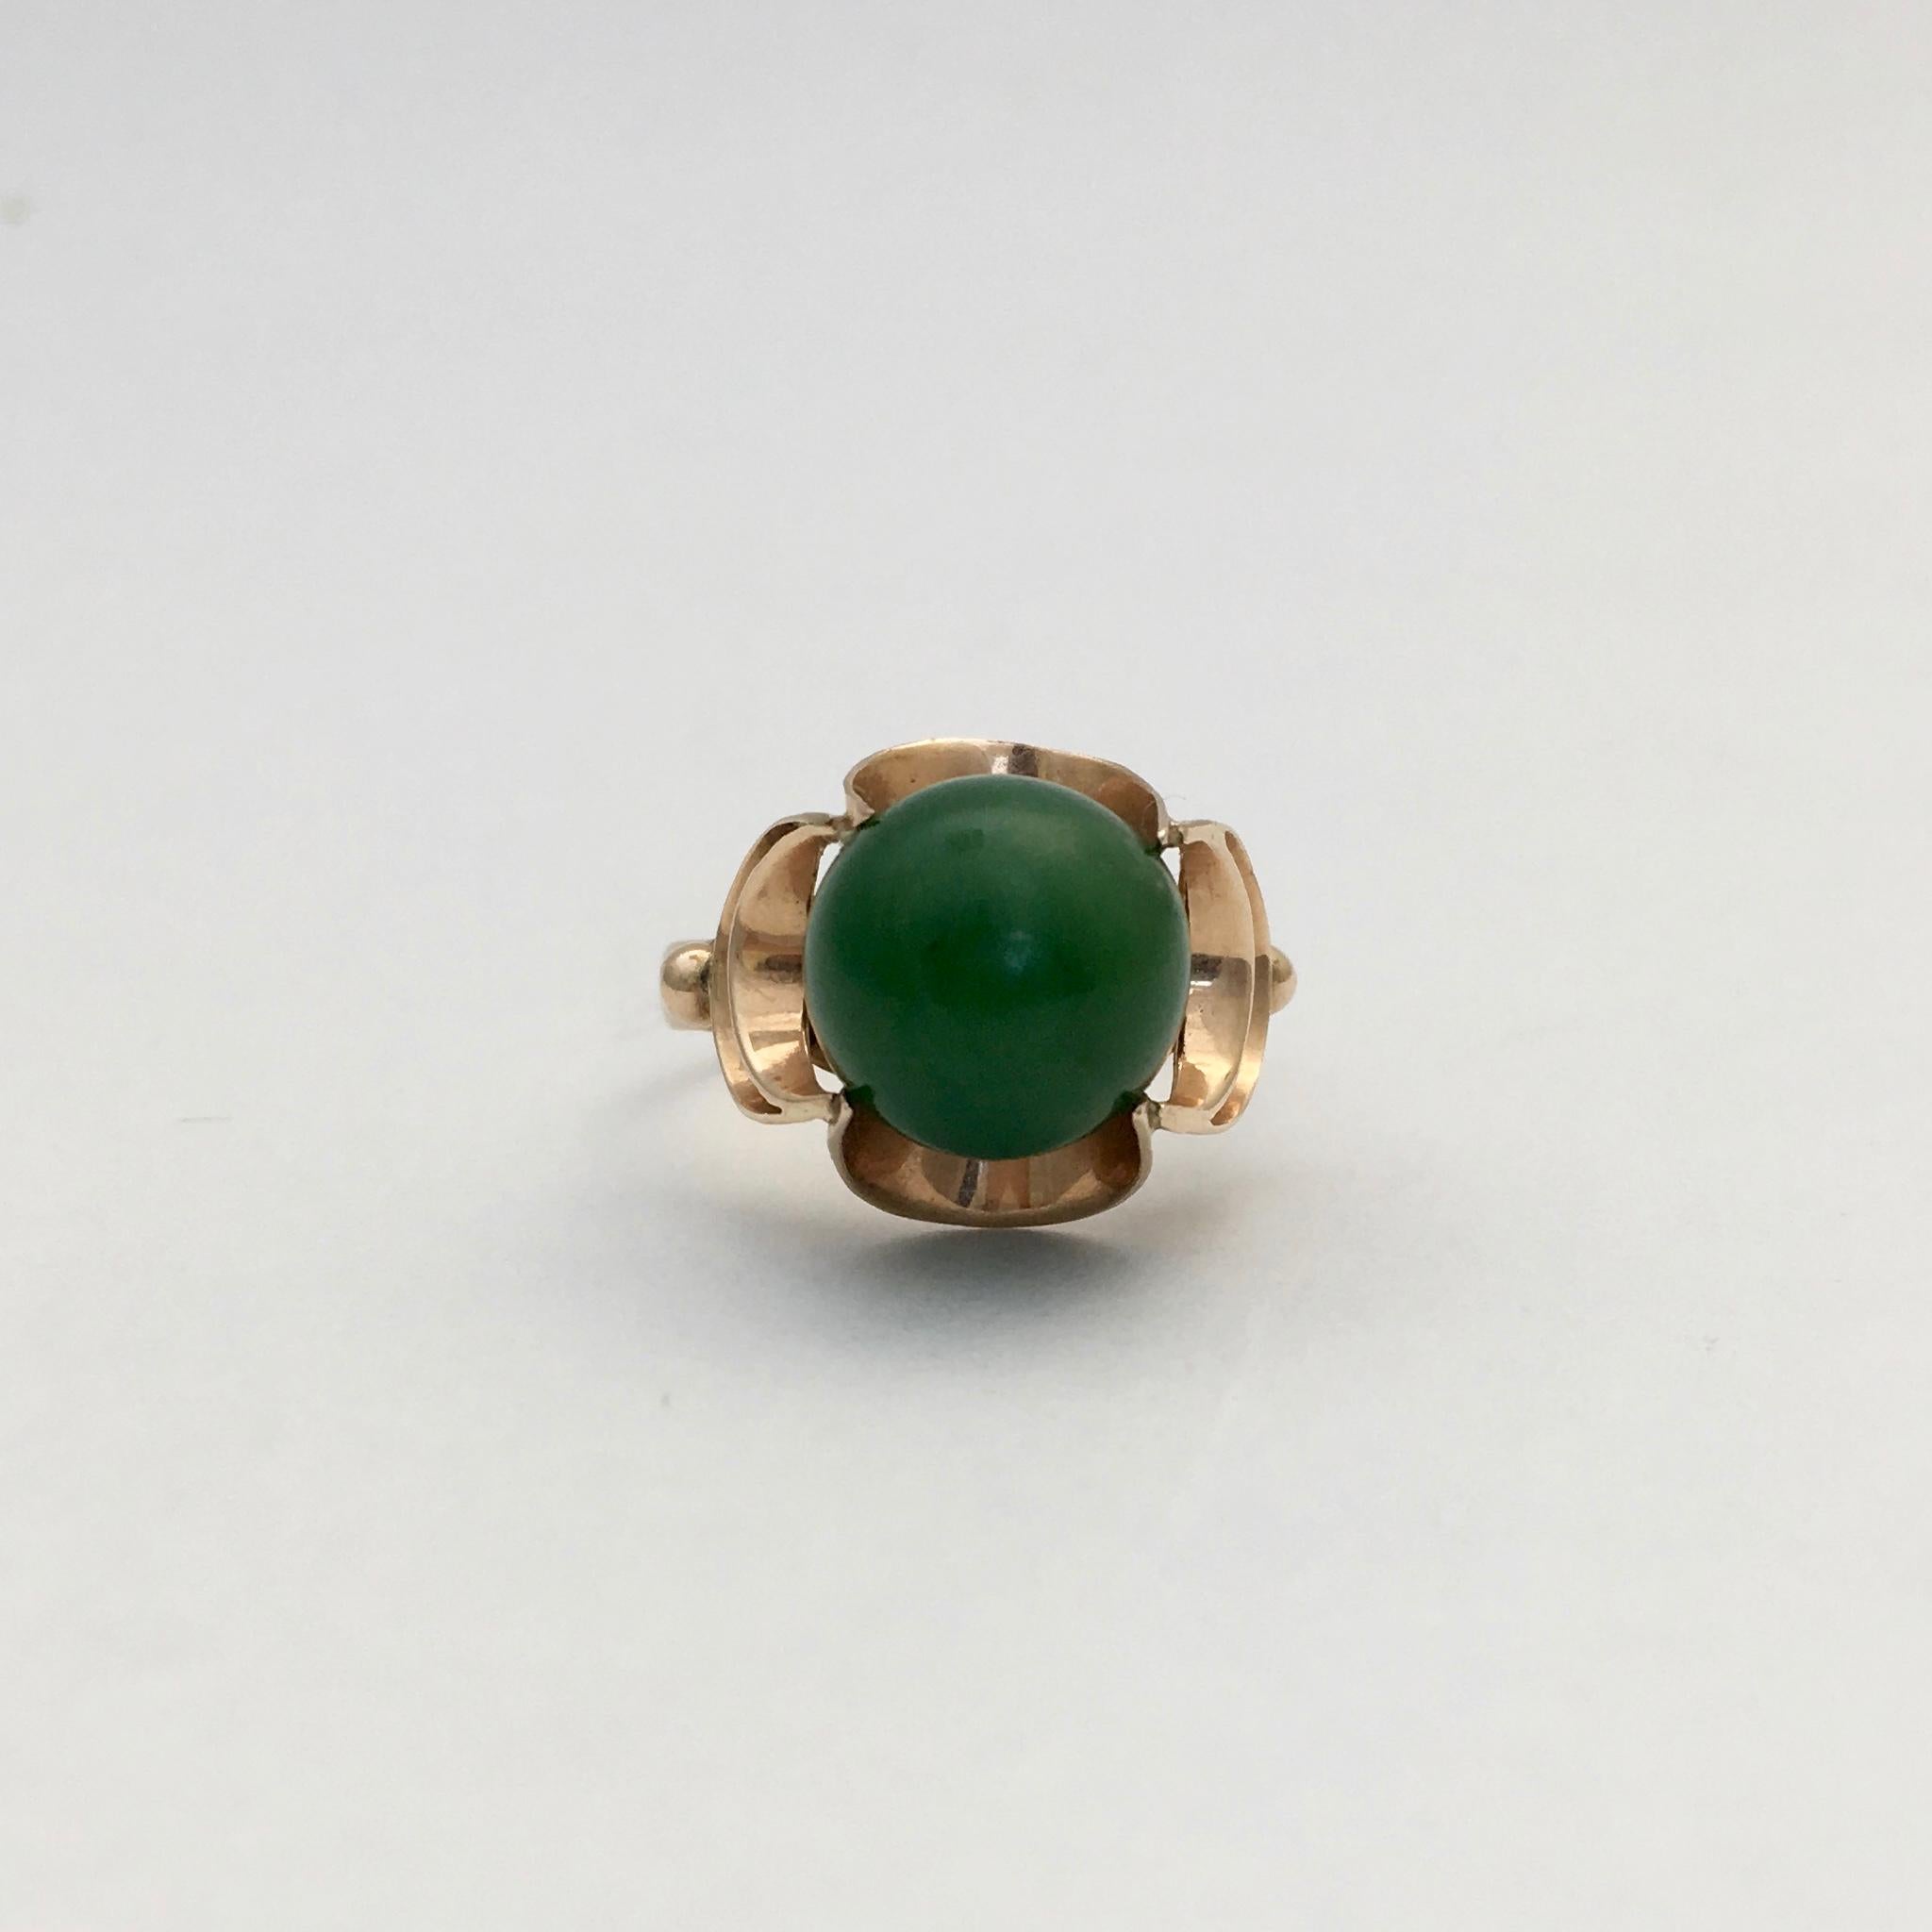 This striking and unusual jade ring has a modernist air. The spherical jade stone is set tantalisingly within an abstract floral-esque setting. The lush green of the stone is clear and unmarked. There is no date mark on the ring, but it has an